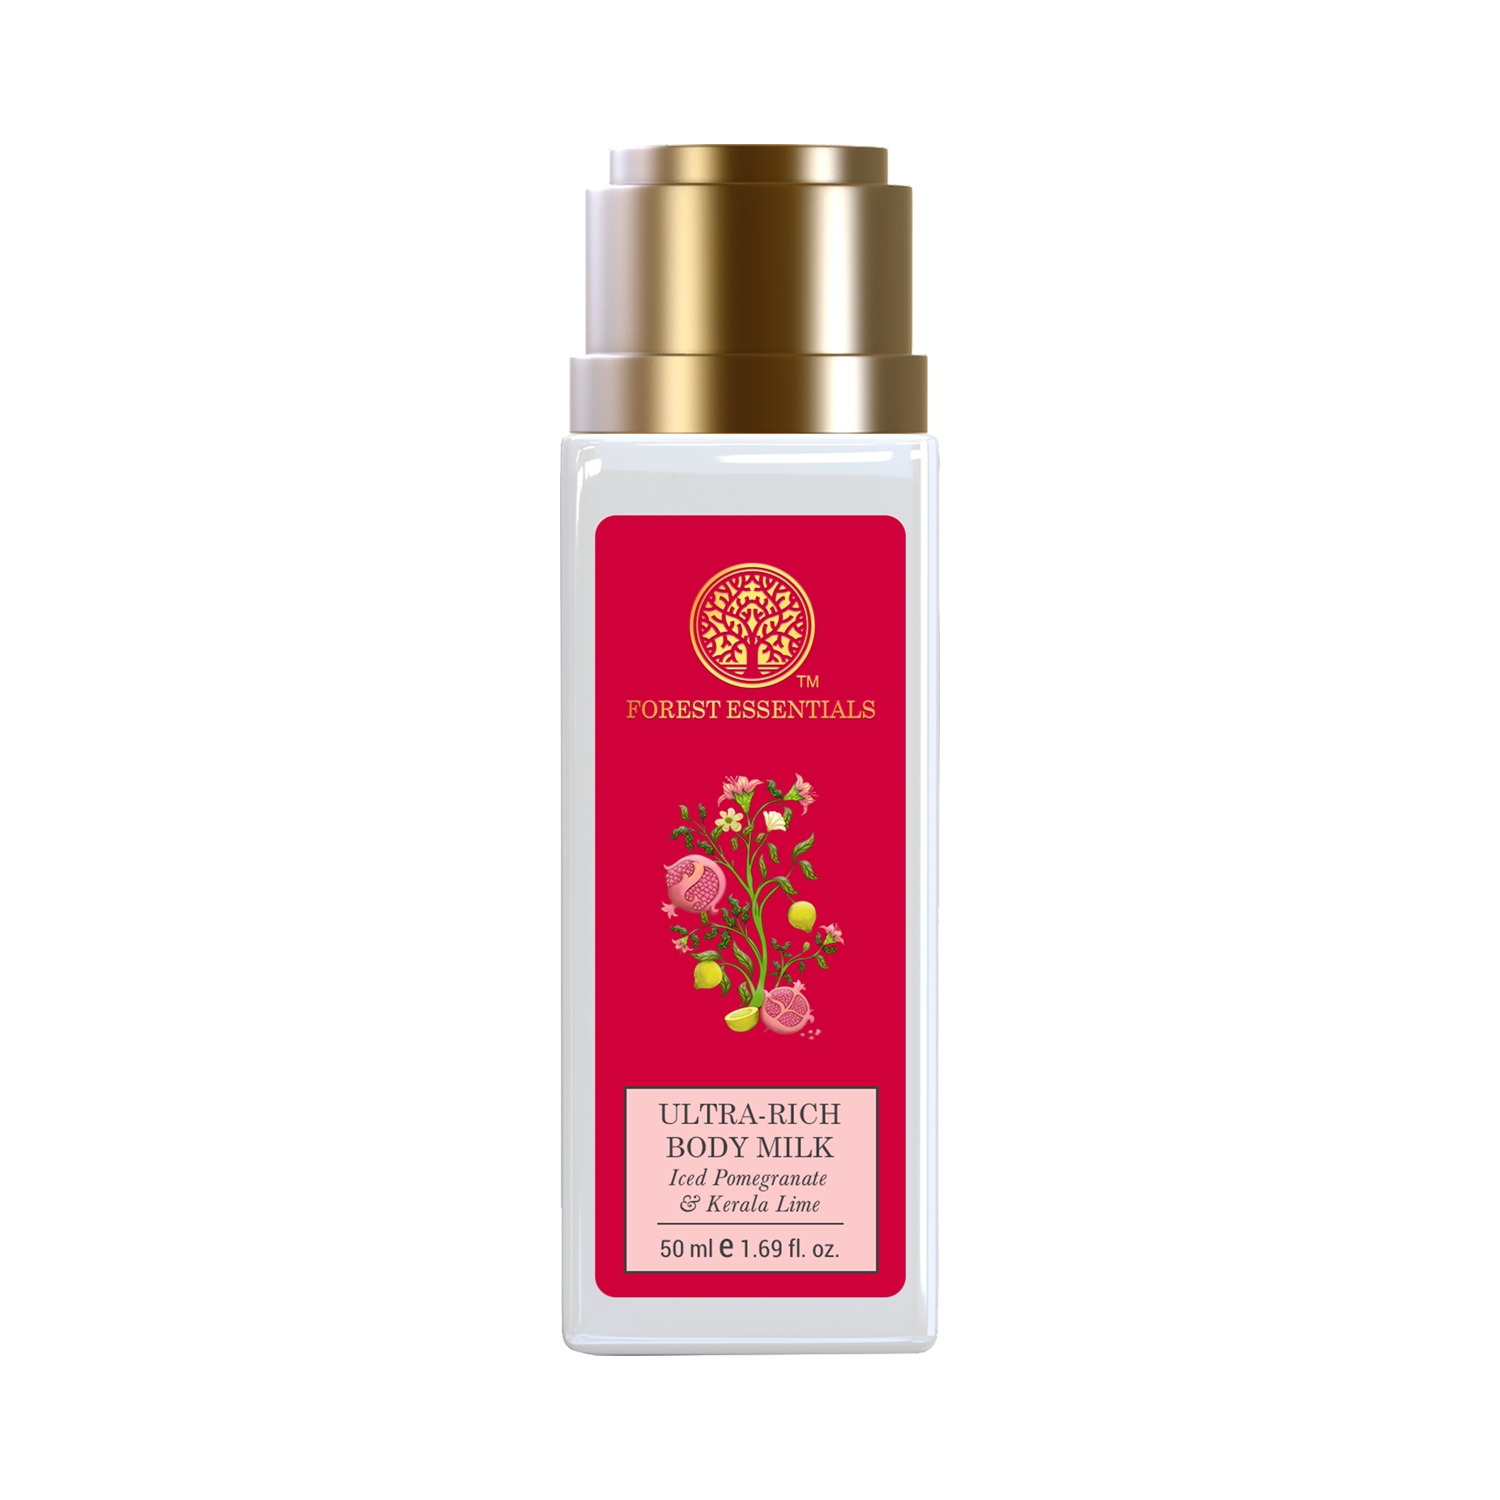 Forest Essentials | Forest Essentials Travel Size Iced Pomegranate & Kerala Lime Ultra-Rich Body Milk (50ml)